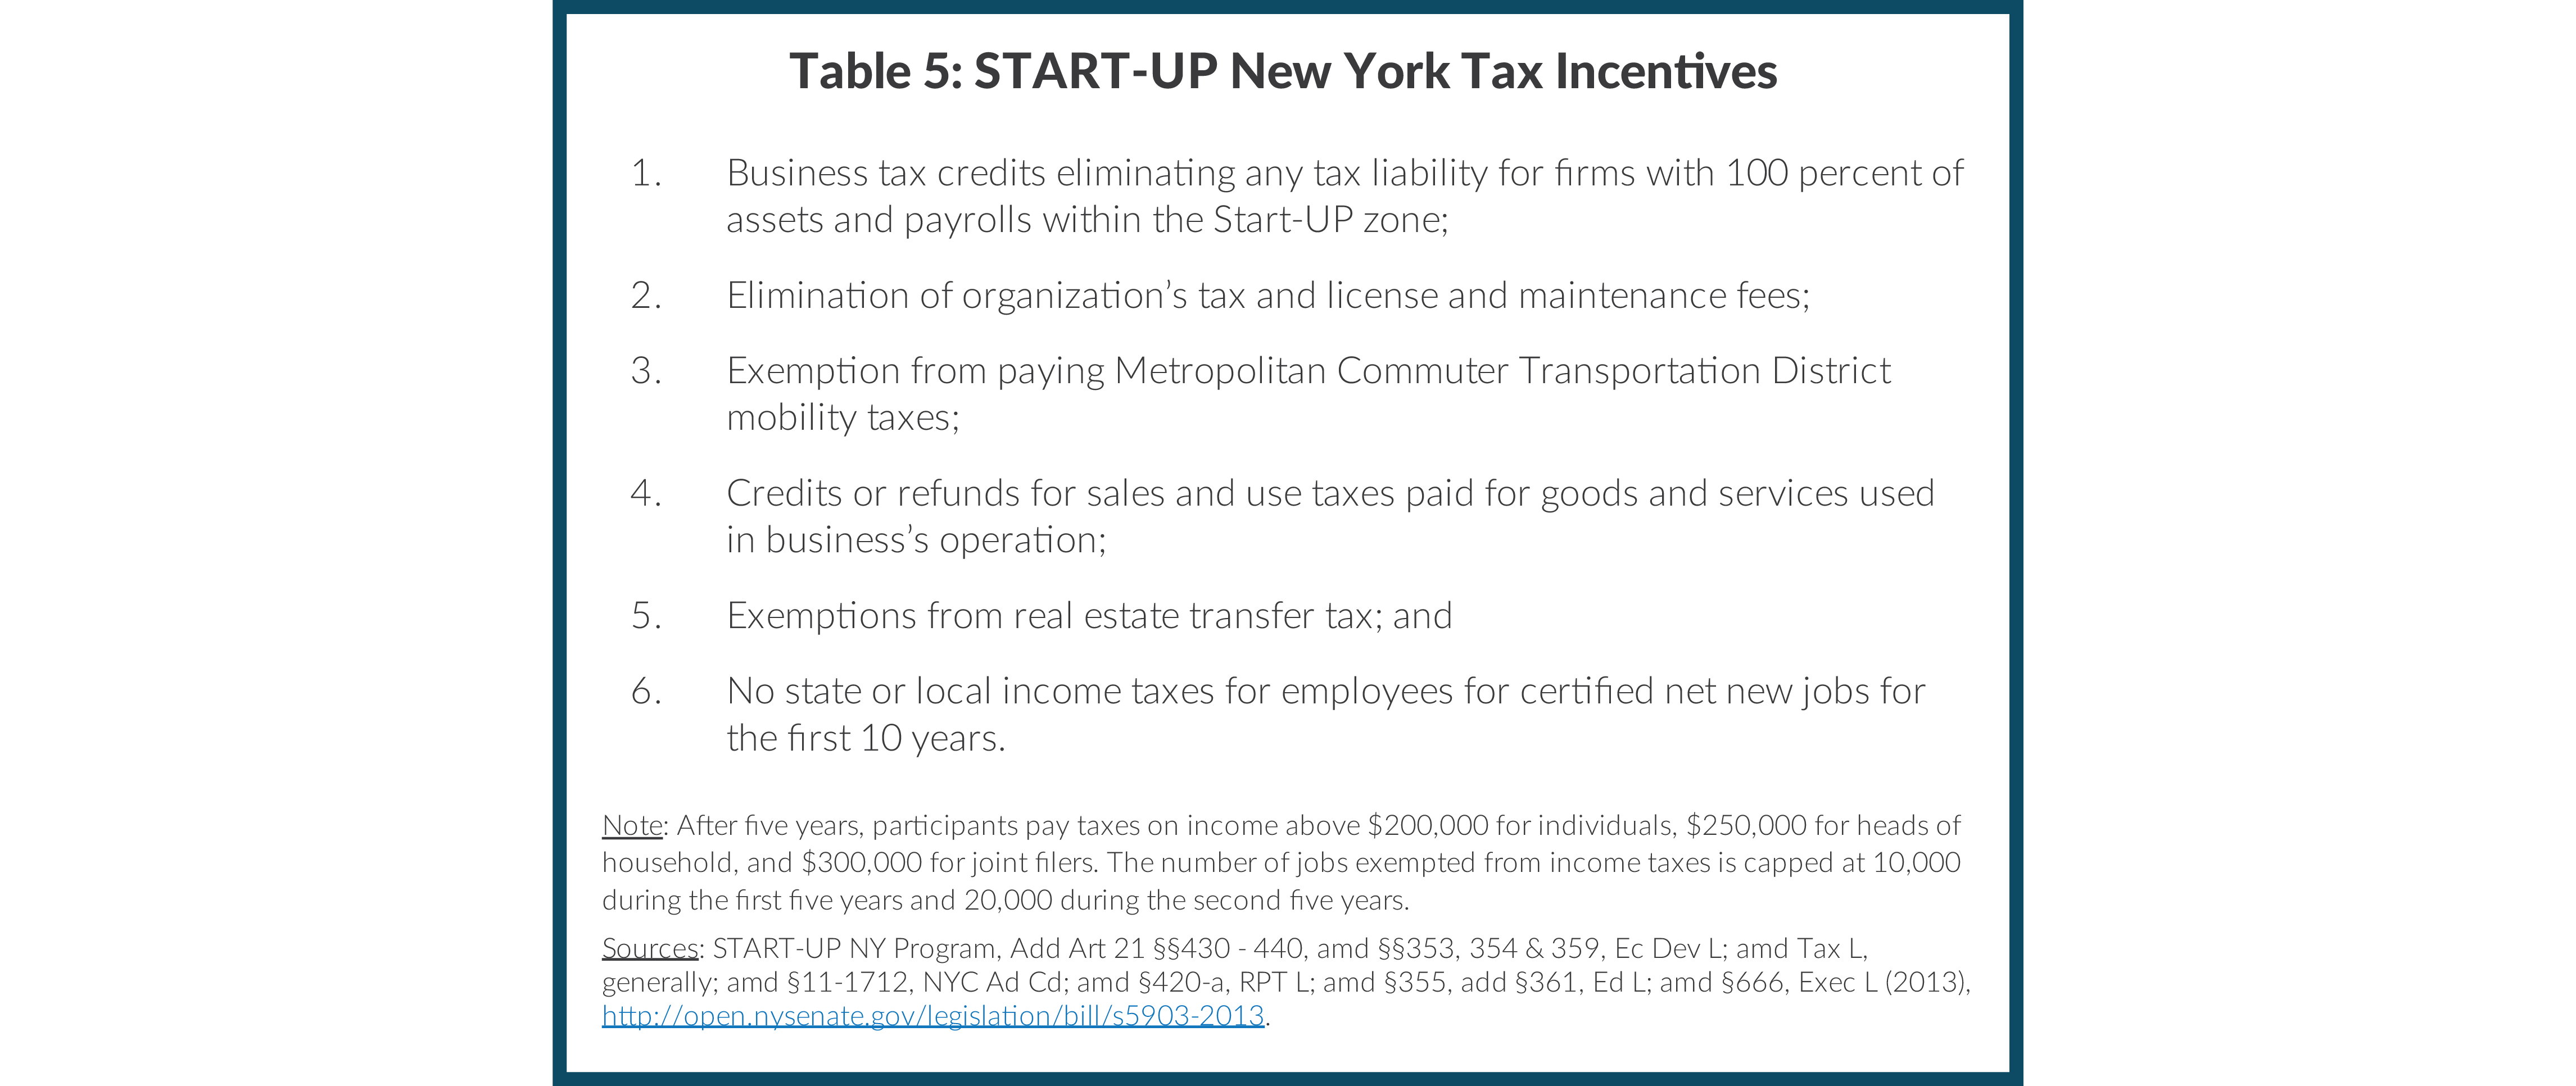 Table 5: START-UP New York Tax Incentives